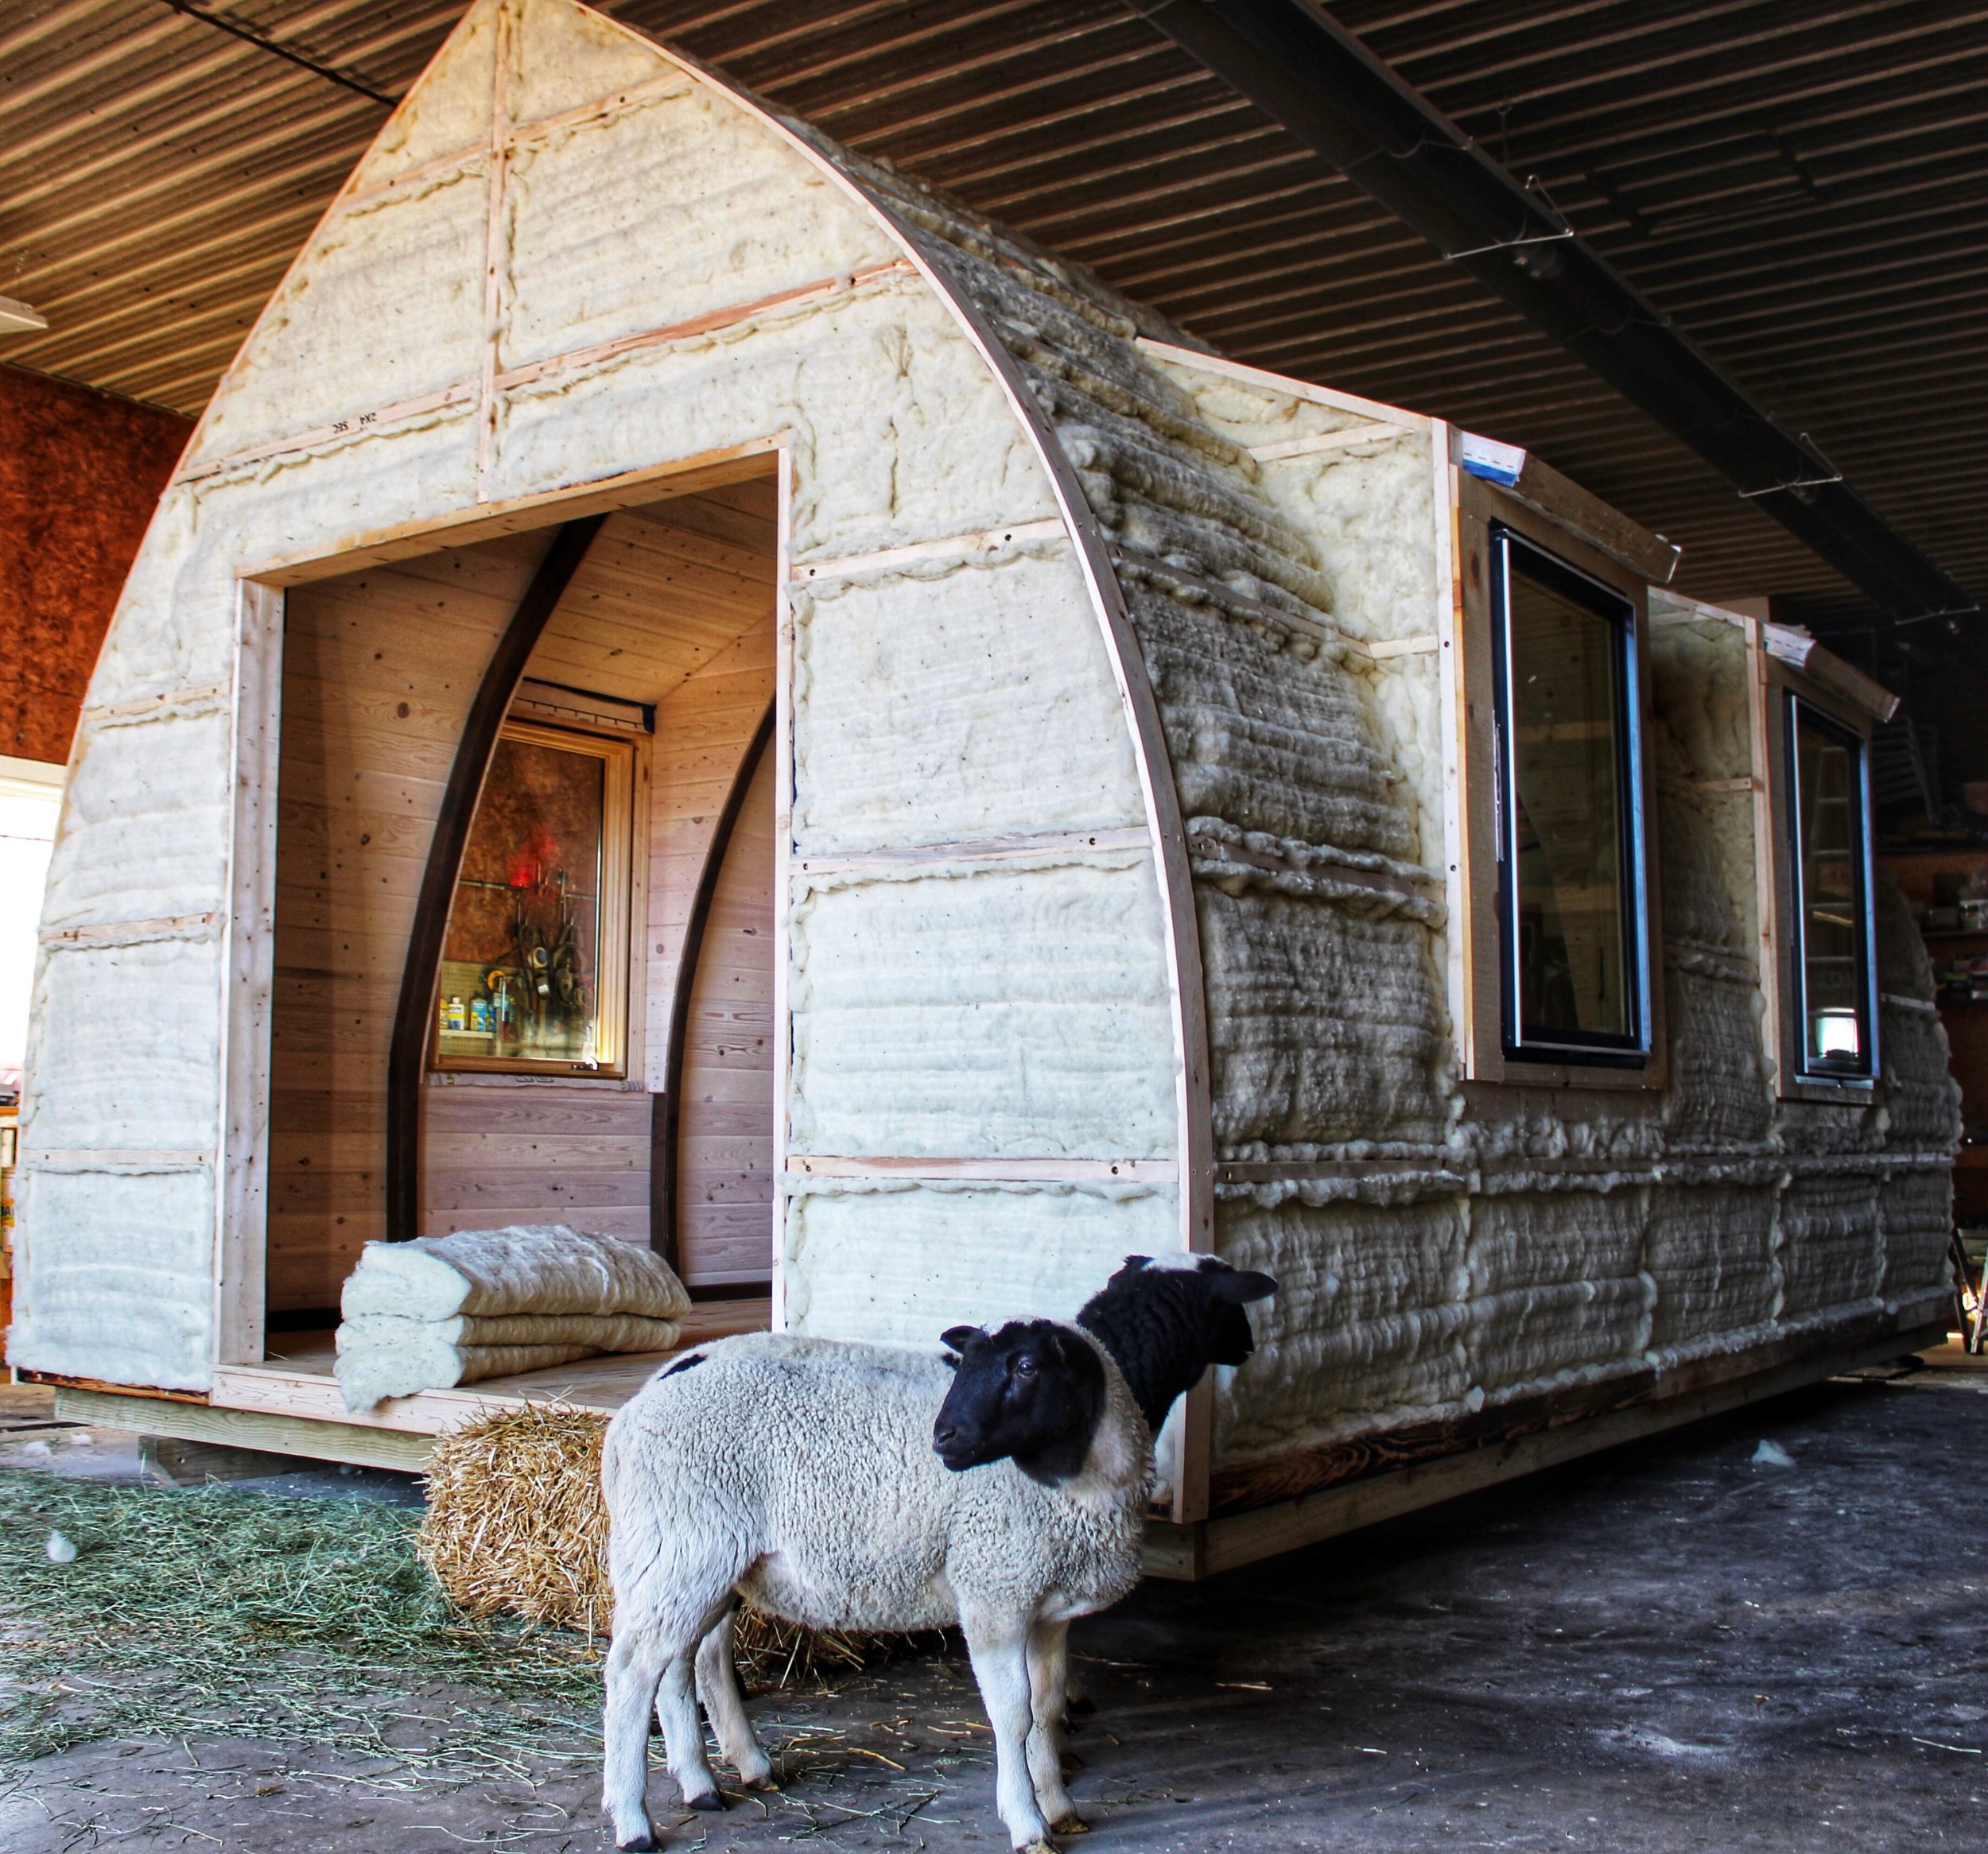 Buy an arched tiny home kit for just under $1,500